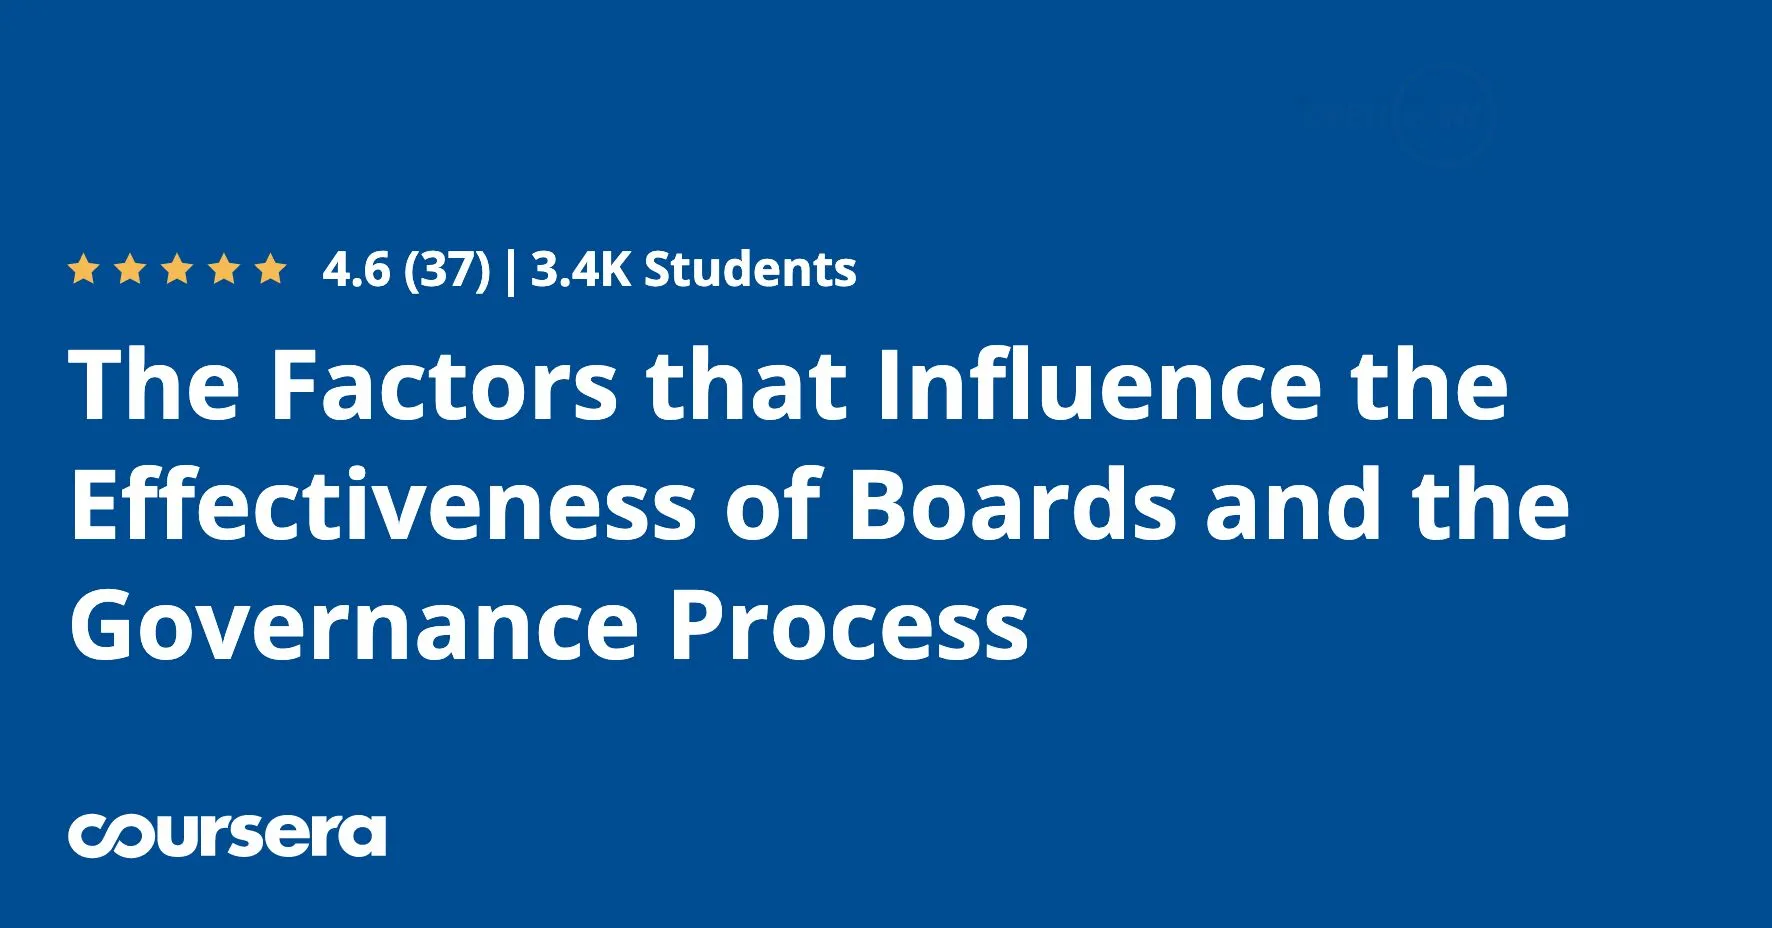 The Factors that Influence the Effectiveness of Boards and the Governance Process